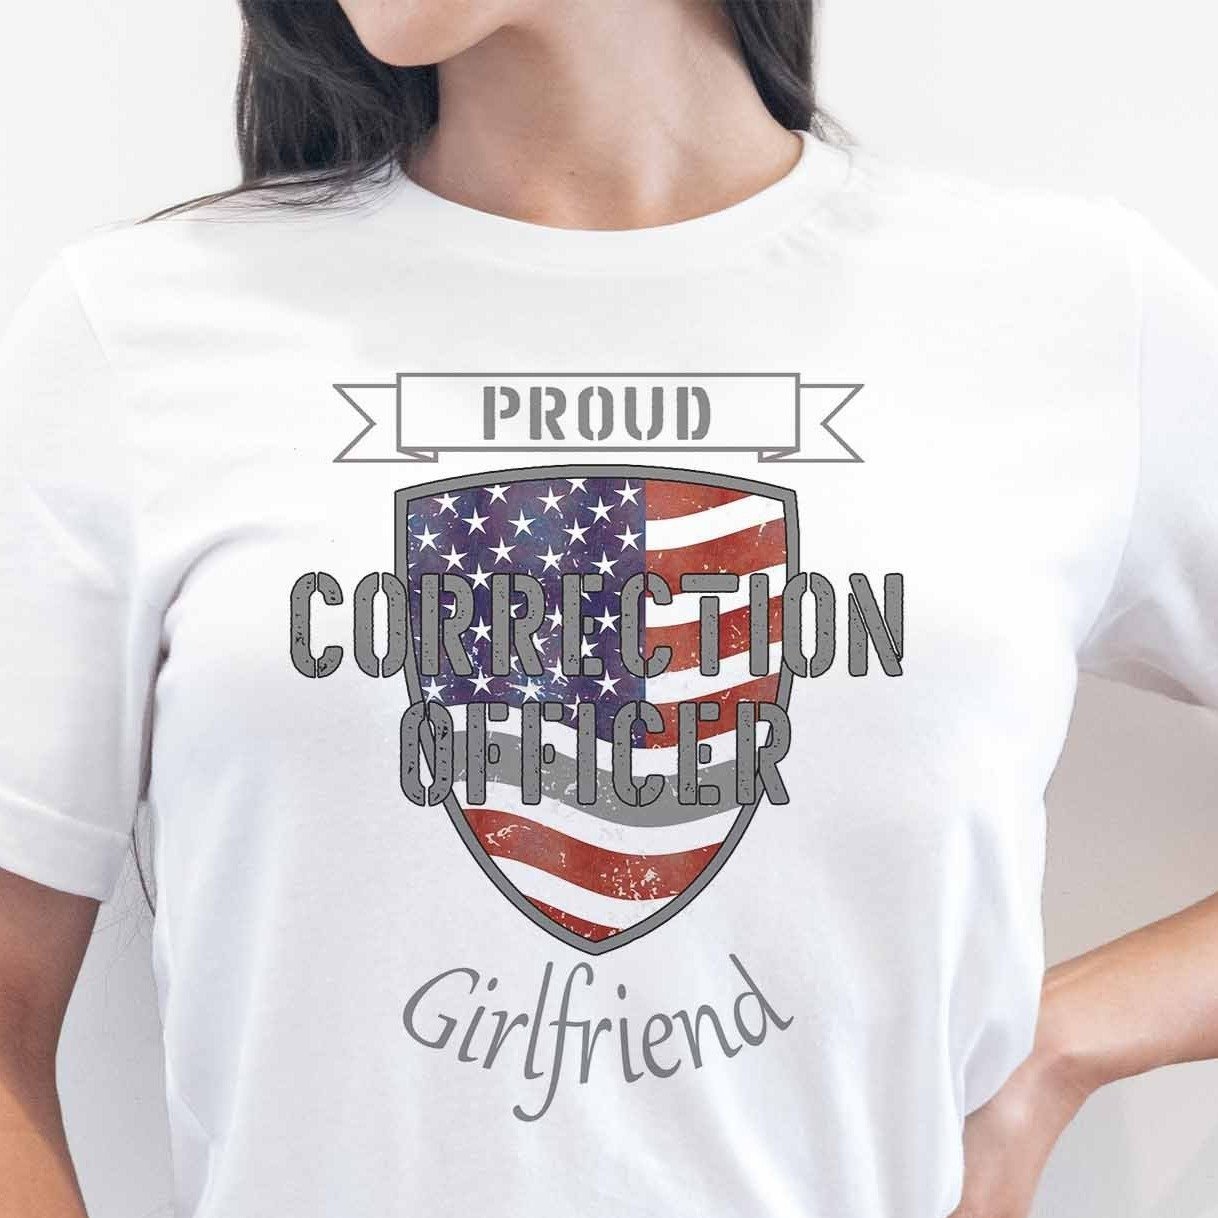 Proud Correction Officer Girlfriend - My Custom Tee Party